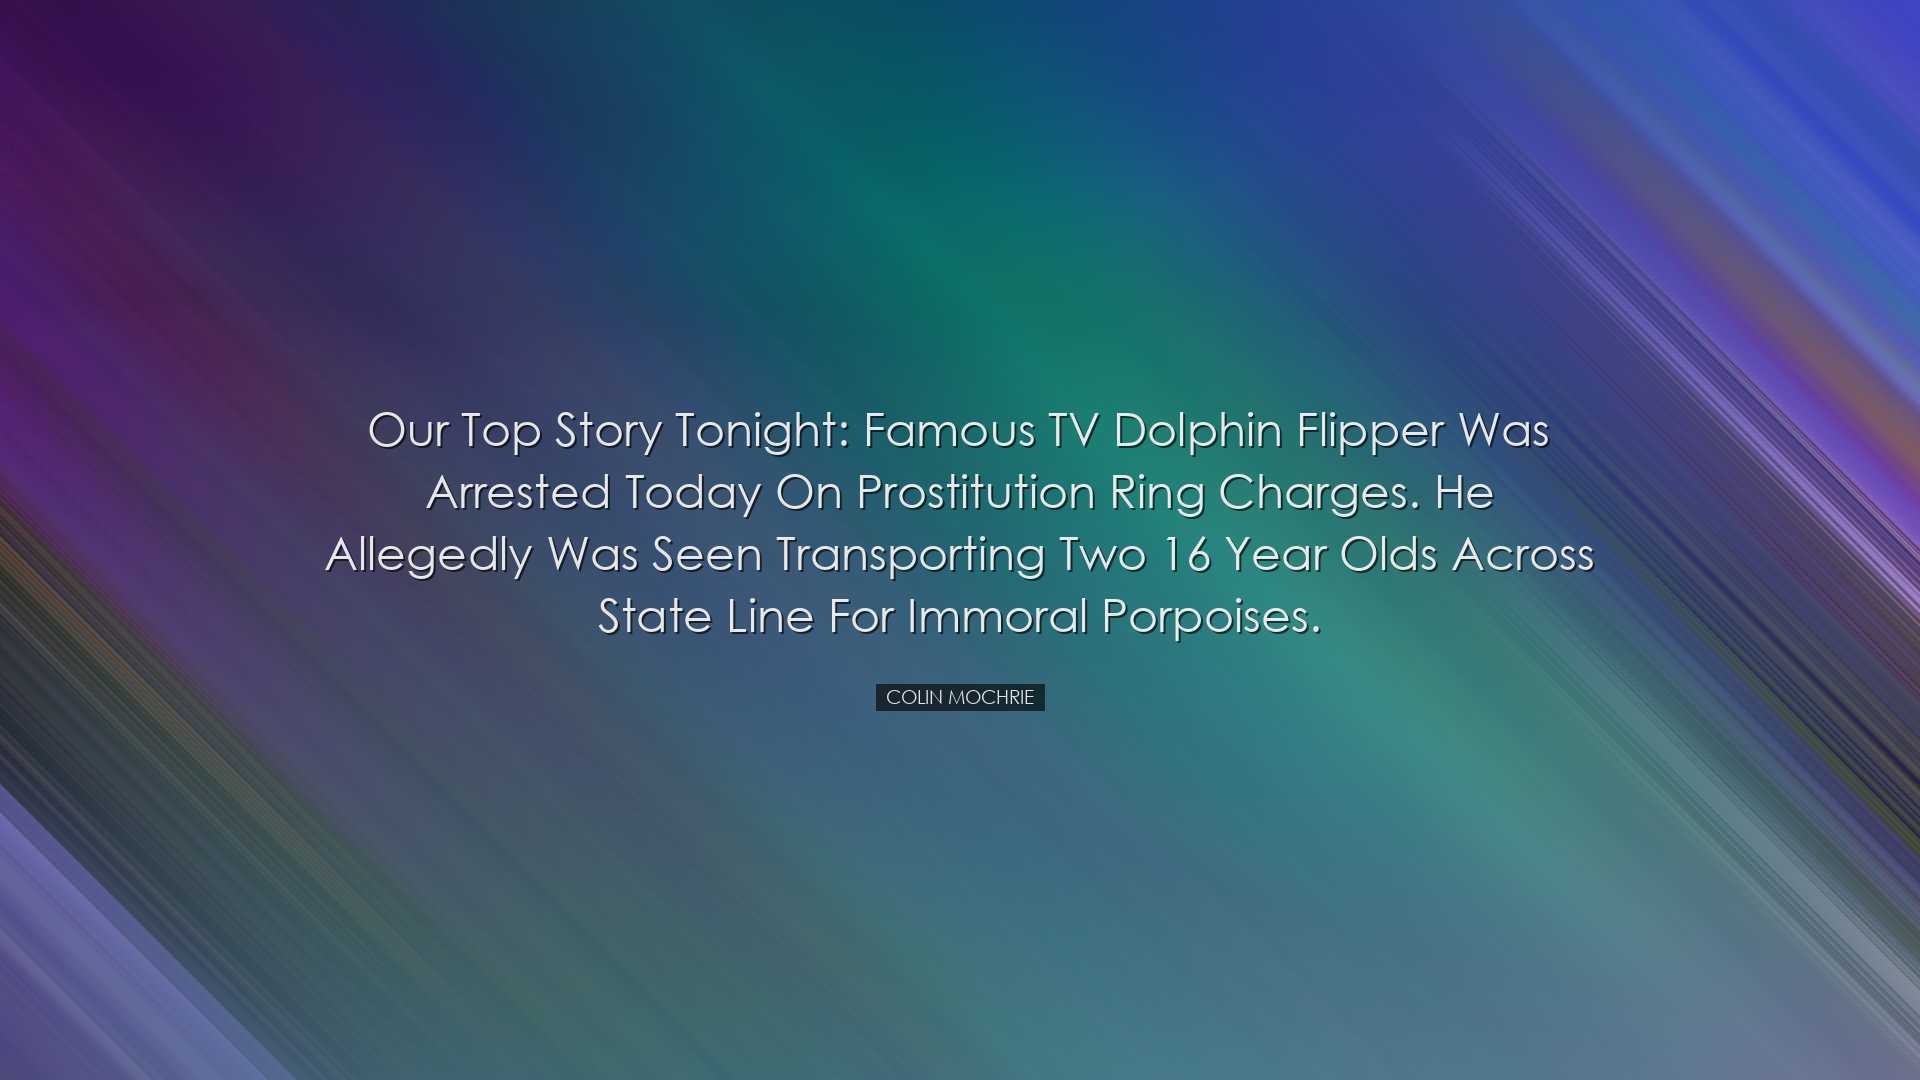 Our top story tonight: Famous TV dolphin flipper was arrested toda